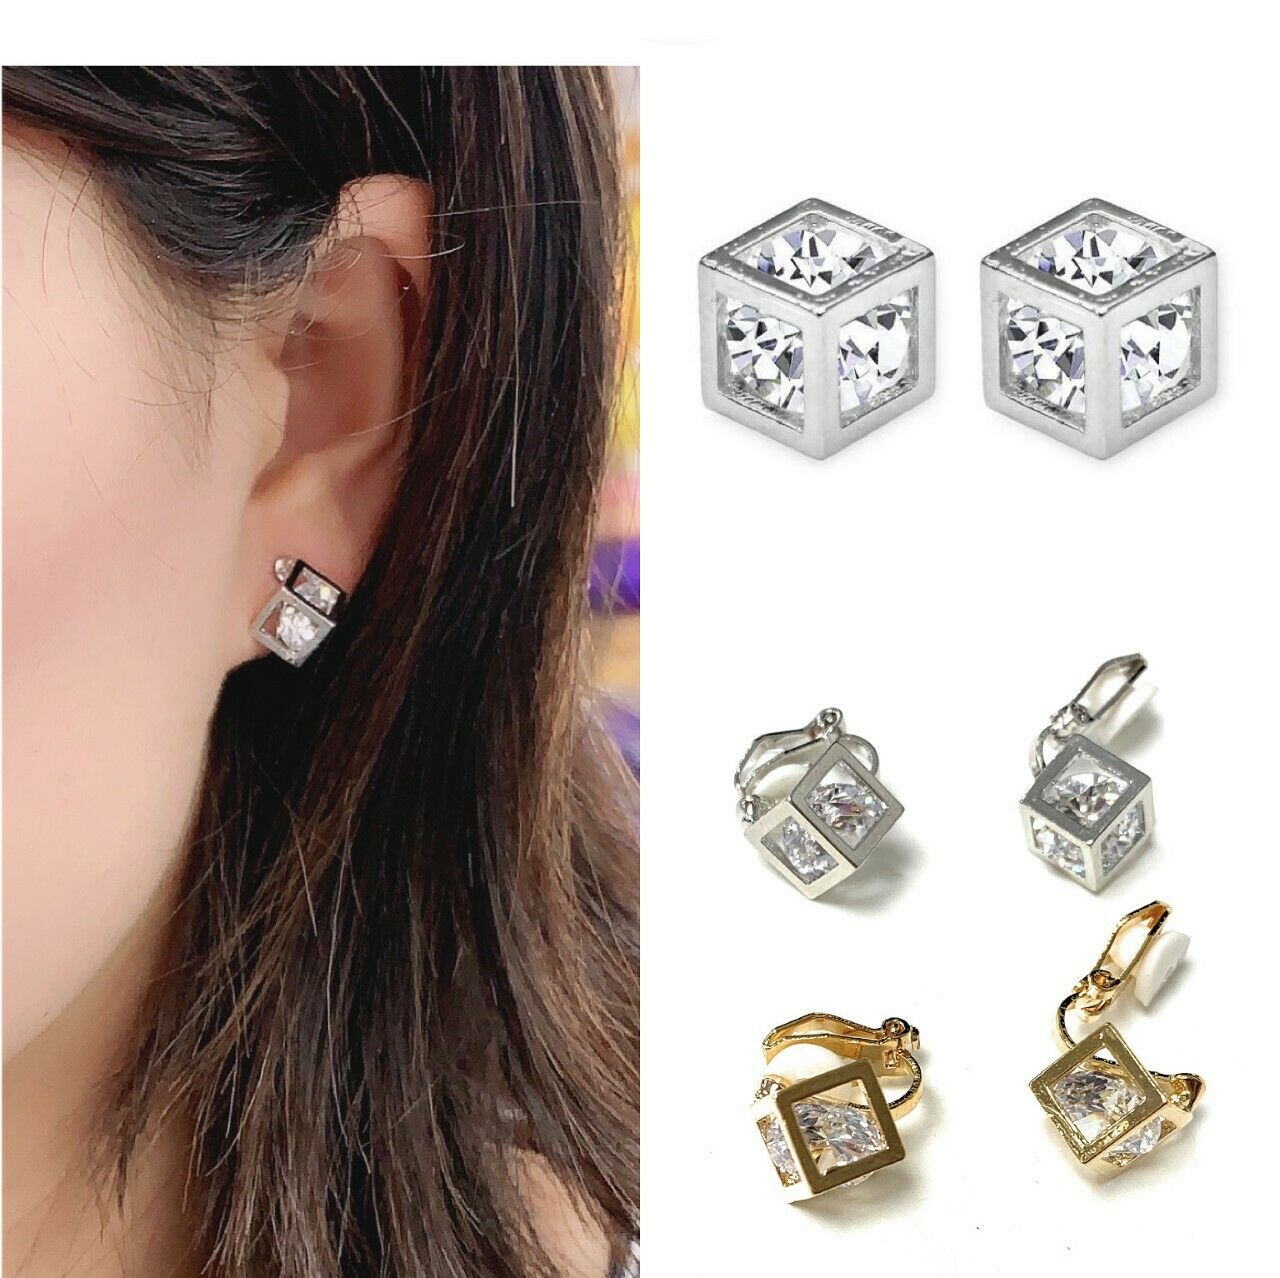 Girls Women's High Quality Sparkly Zircon Crystal Clip On Earrings Studs Gift UK